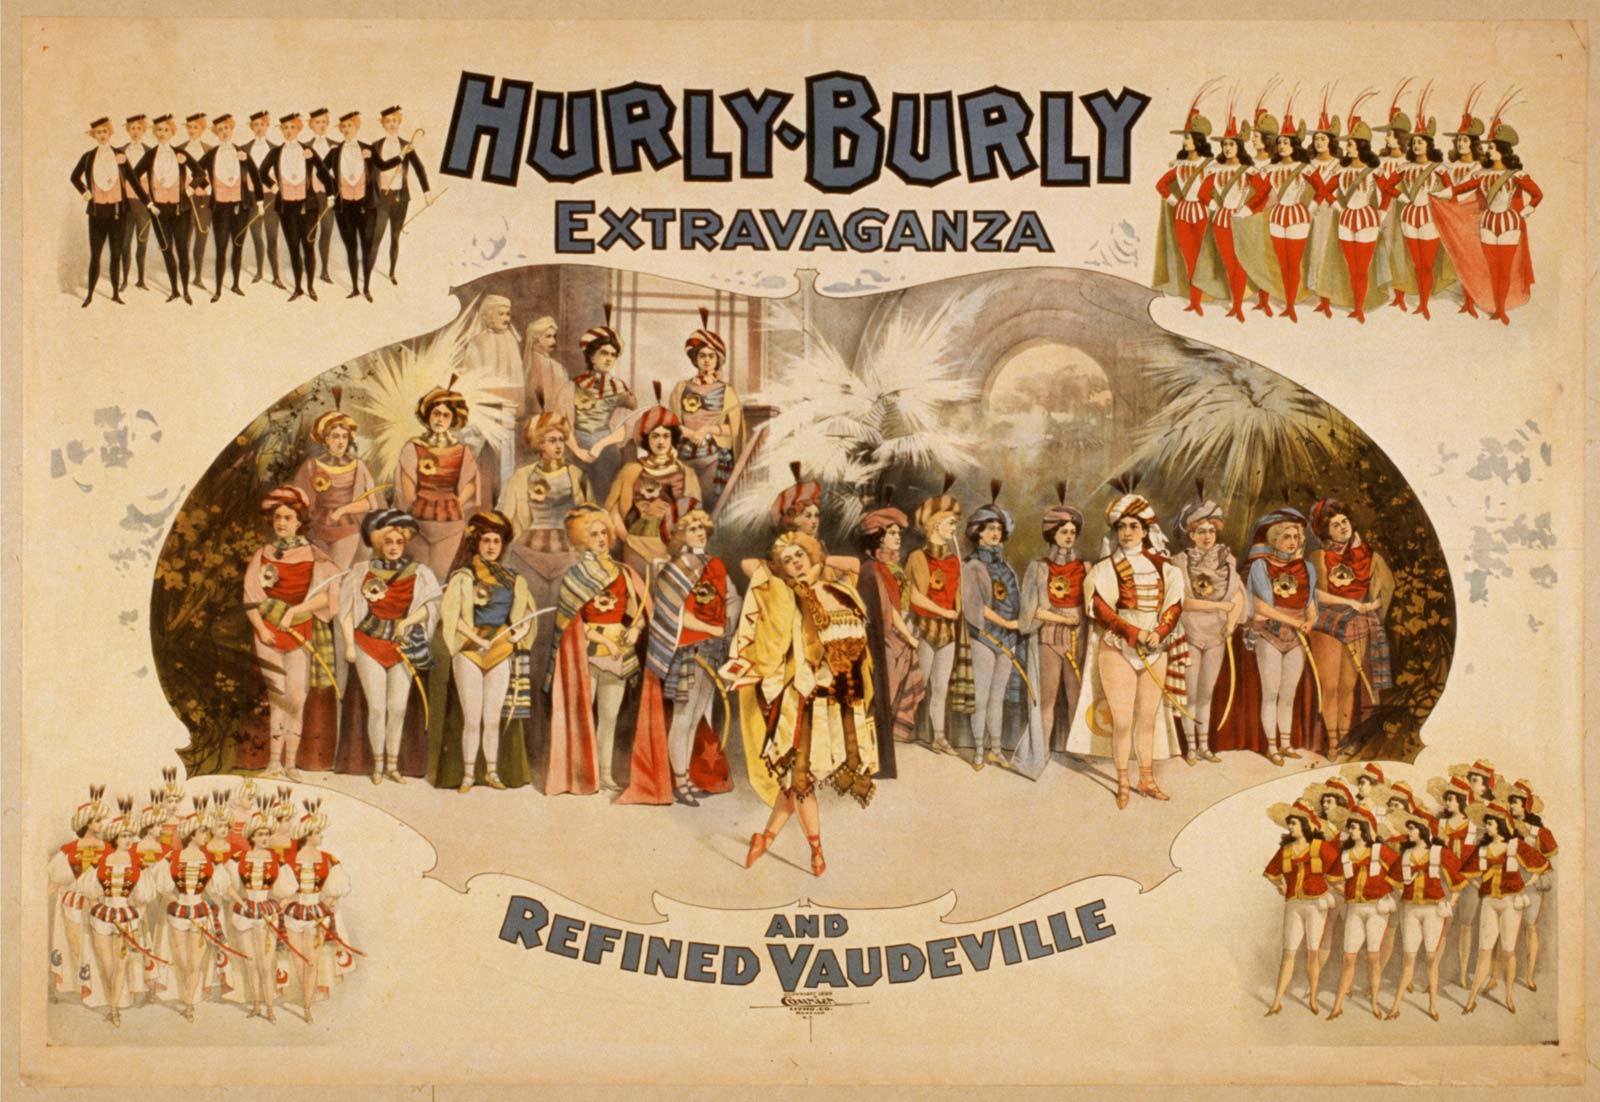 Poster for the Hurly-Burly Extravaganza and Refined Vaudeville, 1899.